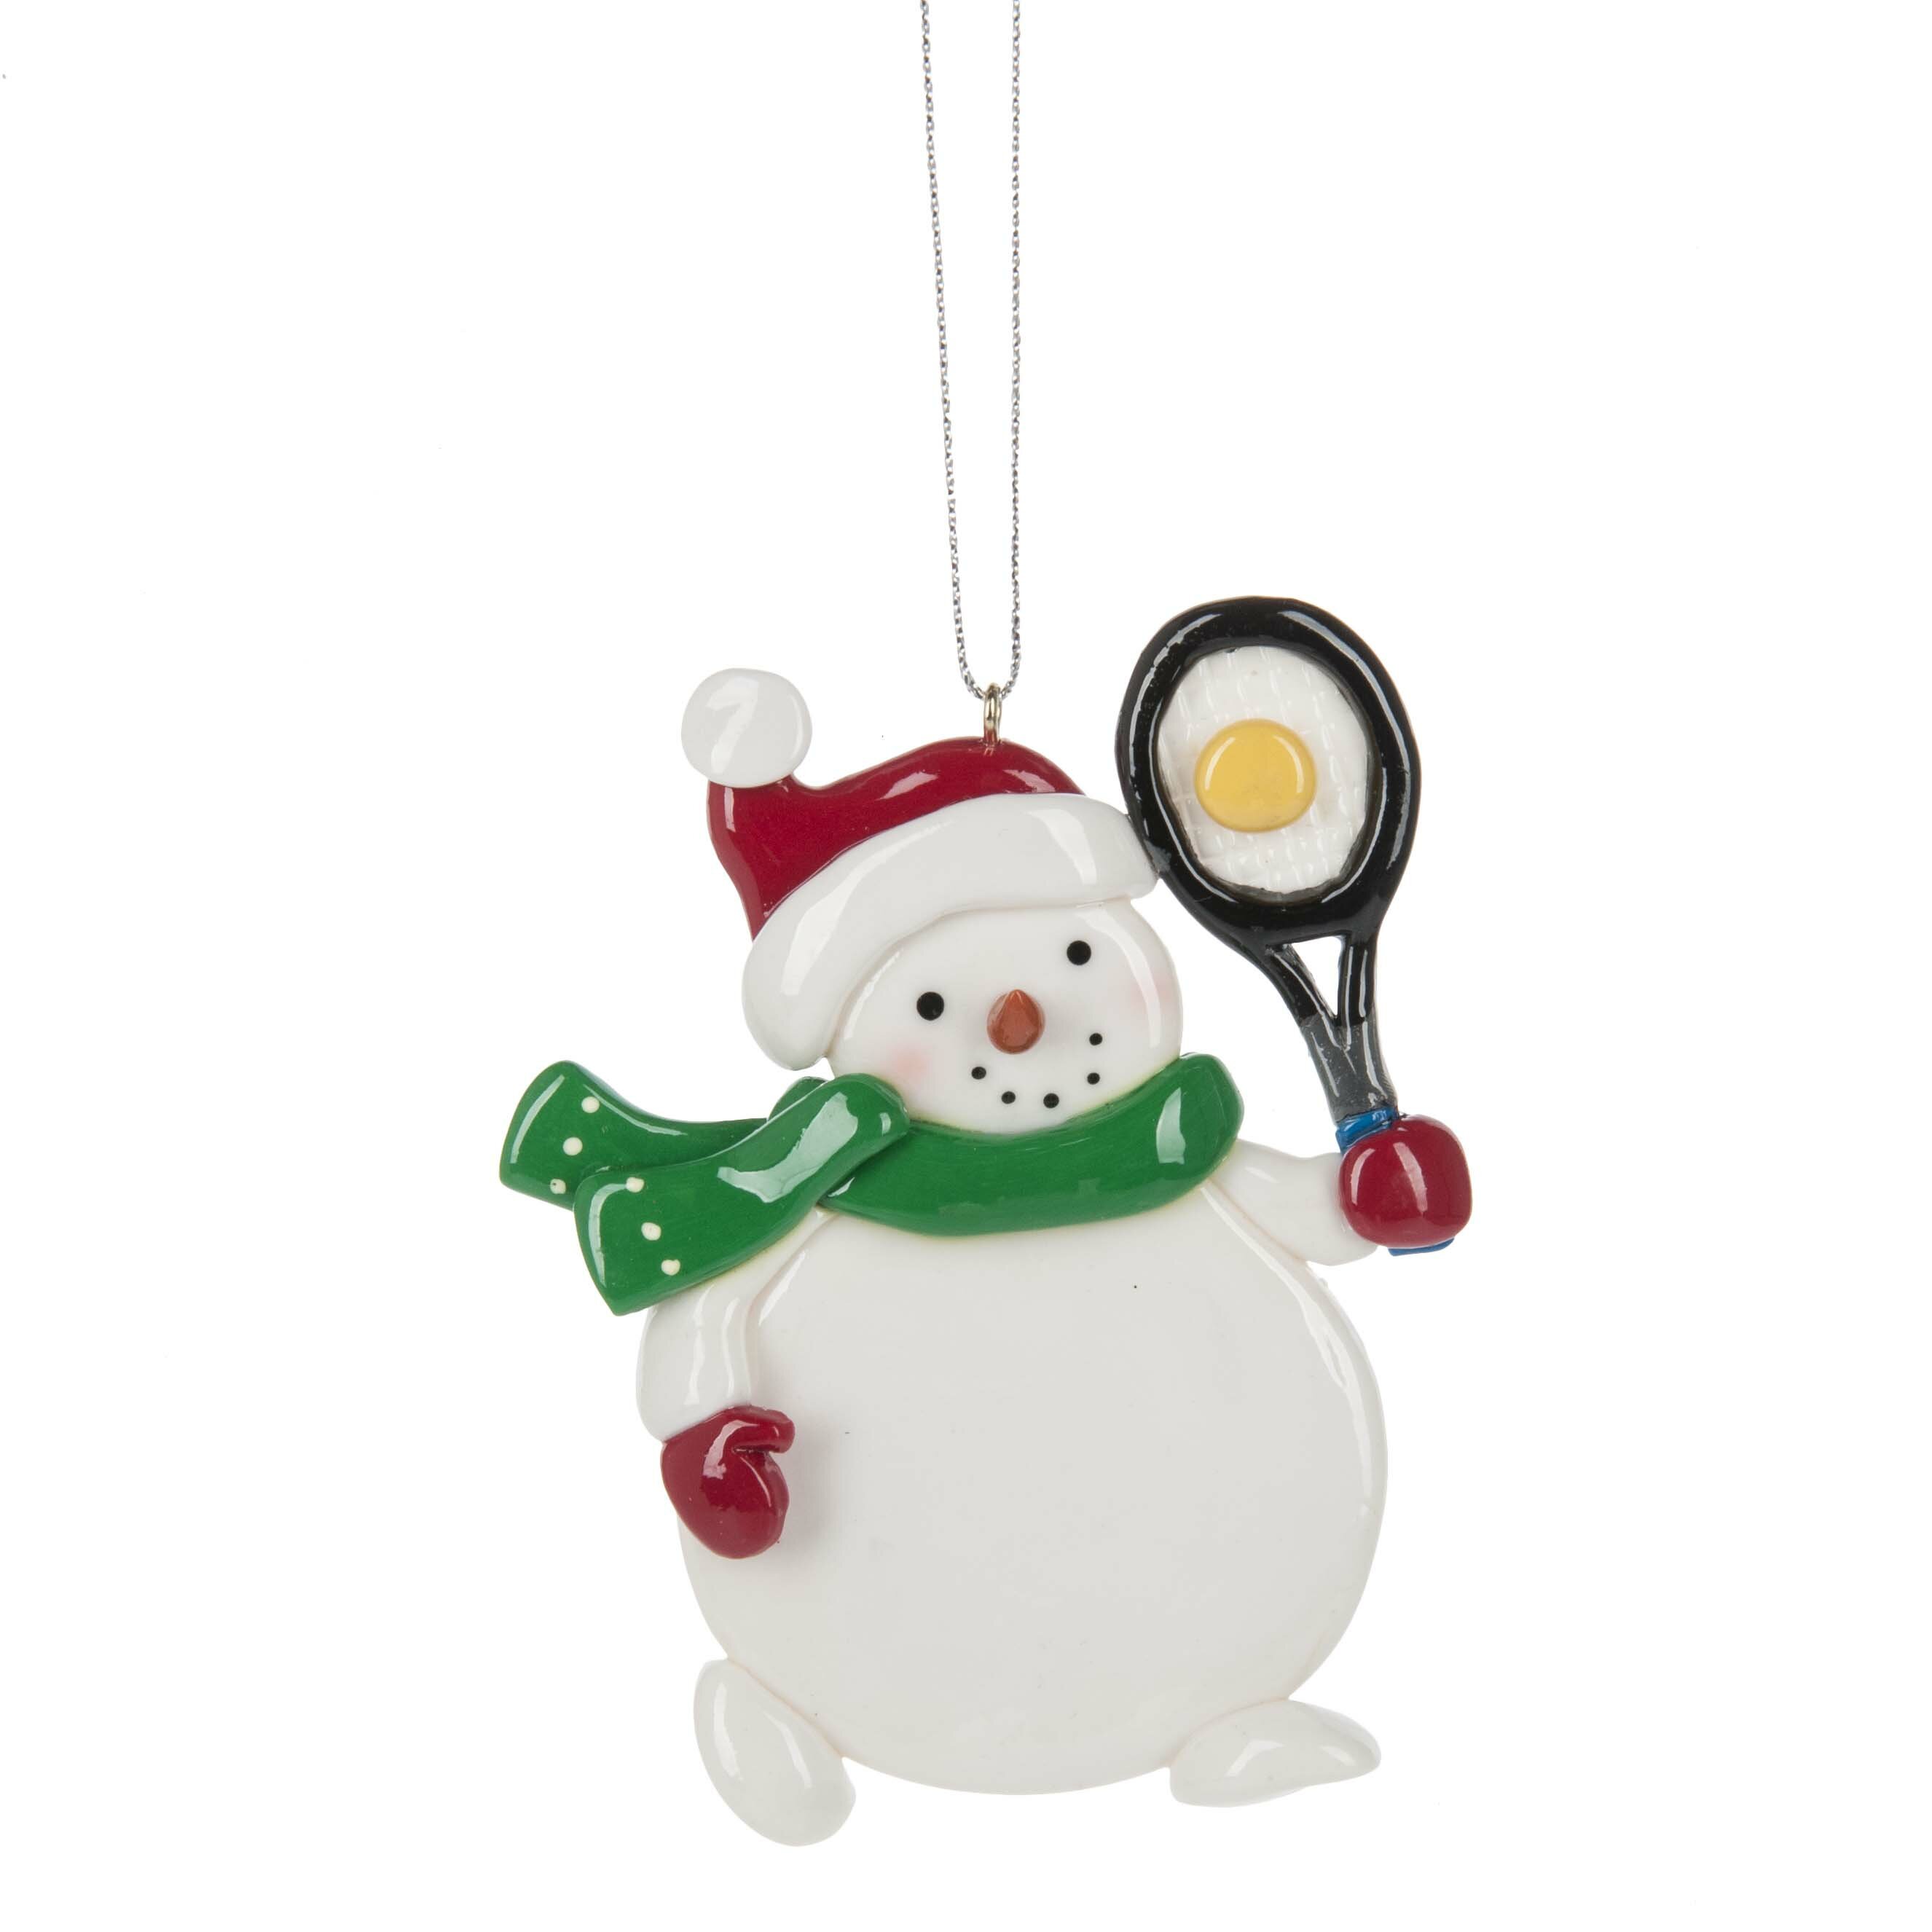 Snowman ready for Tennis with Racquet and Ball Ornament 